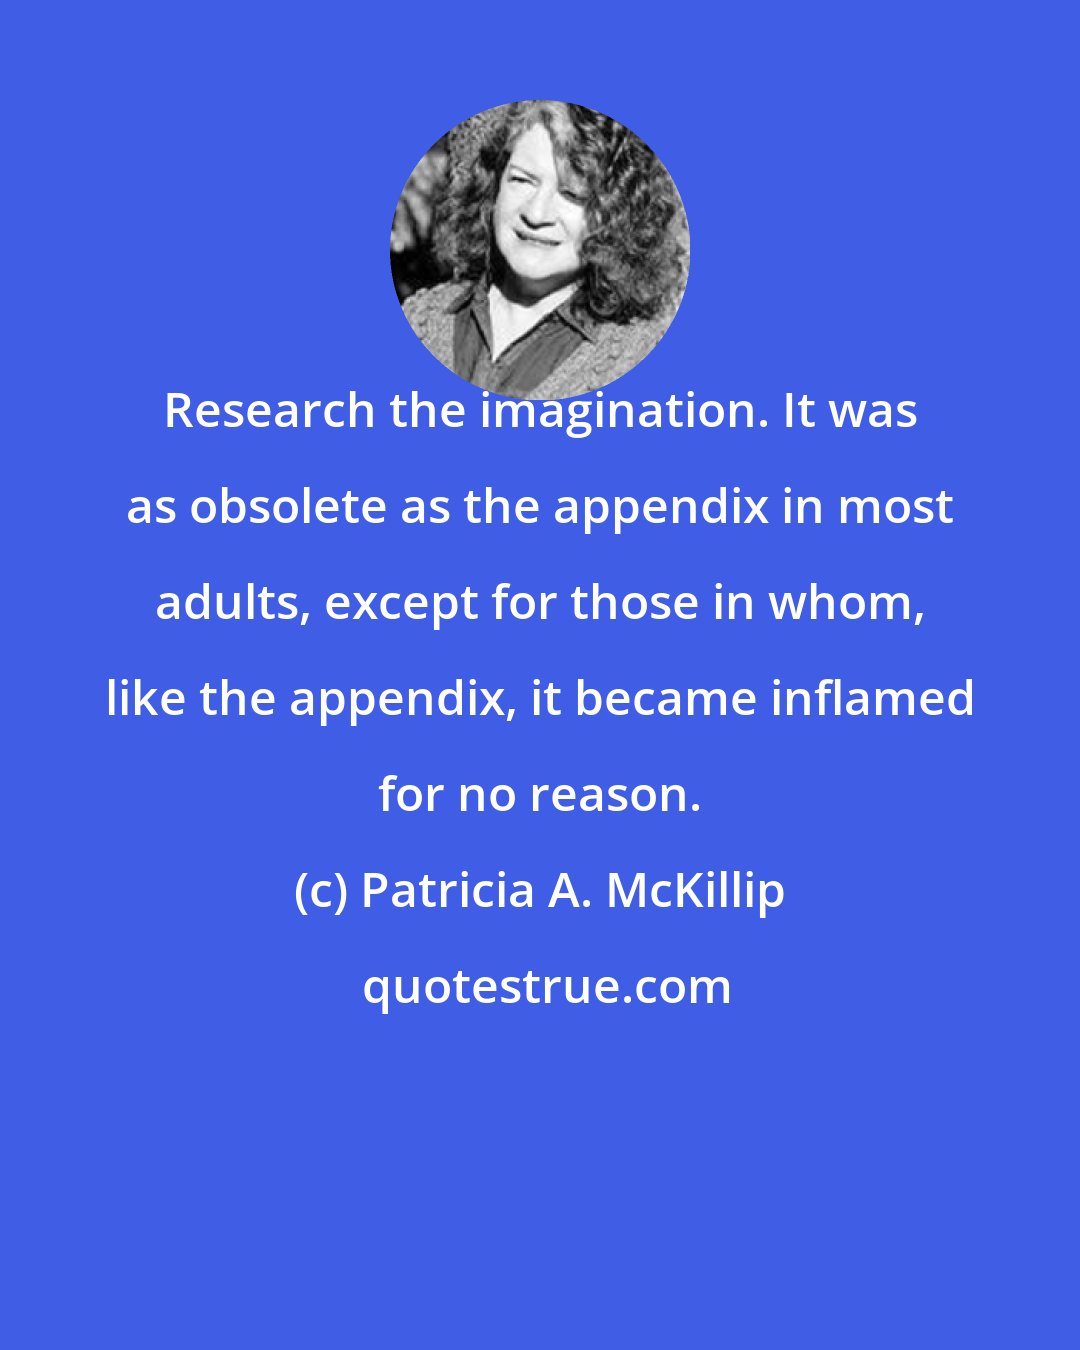 Patricia A. McKillip: Research the imagination. It was as obsolete as the appendix in most adults, except for those in whom, like the appendix, it became inflamed for no reason.